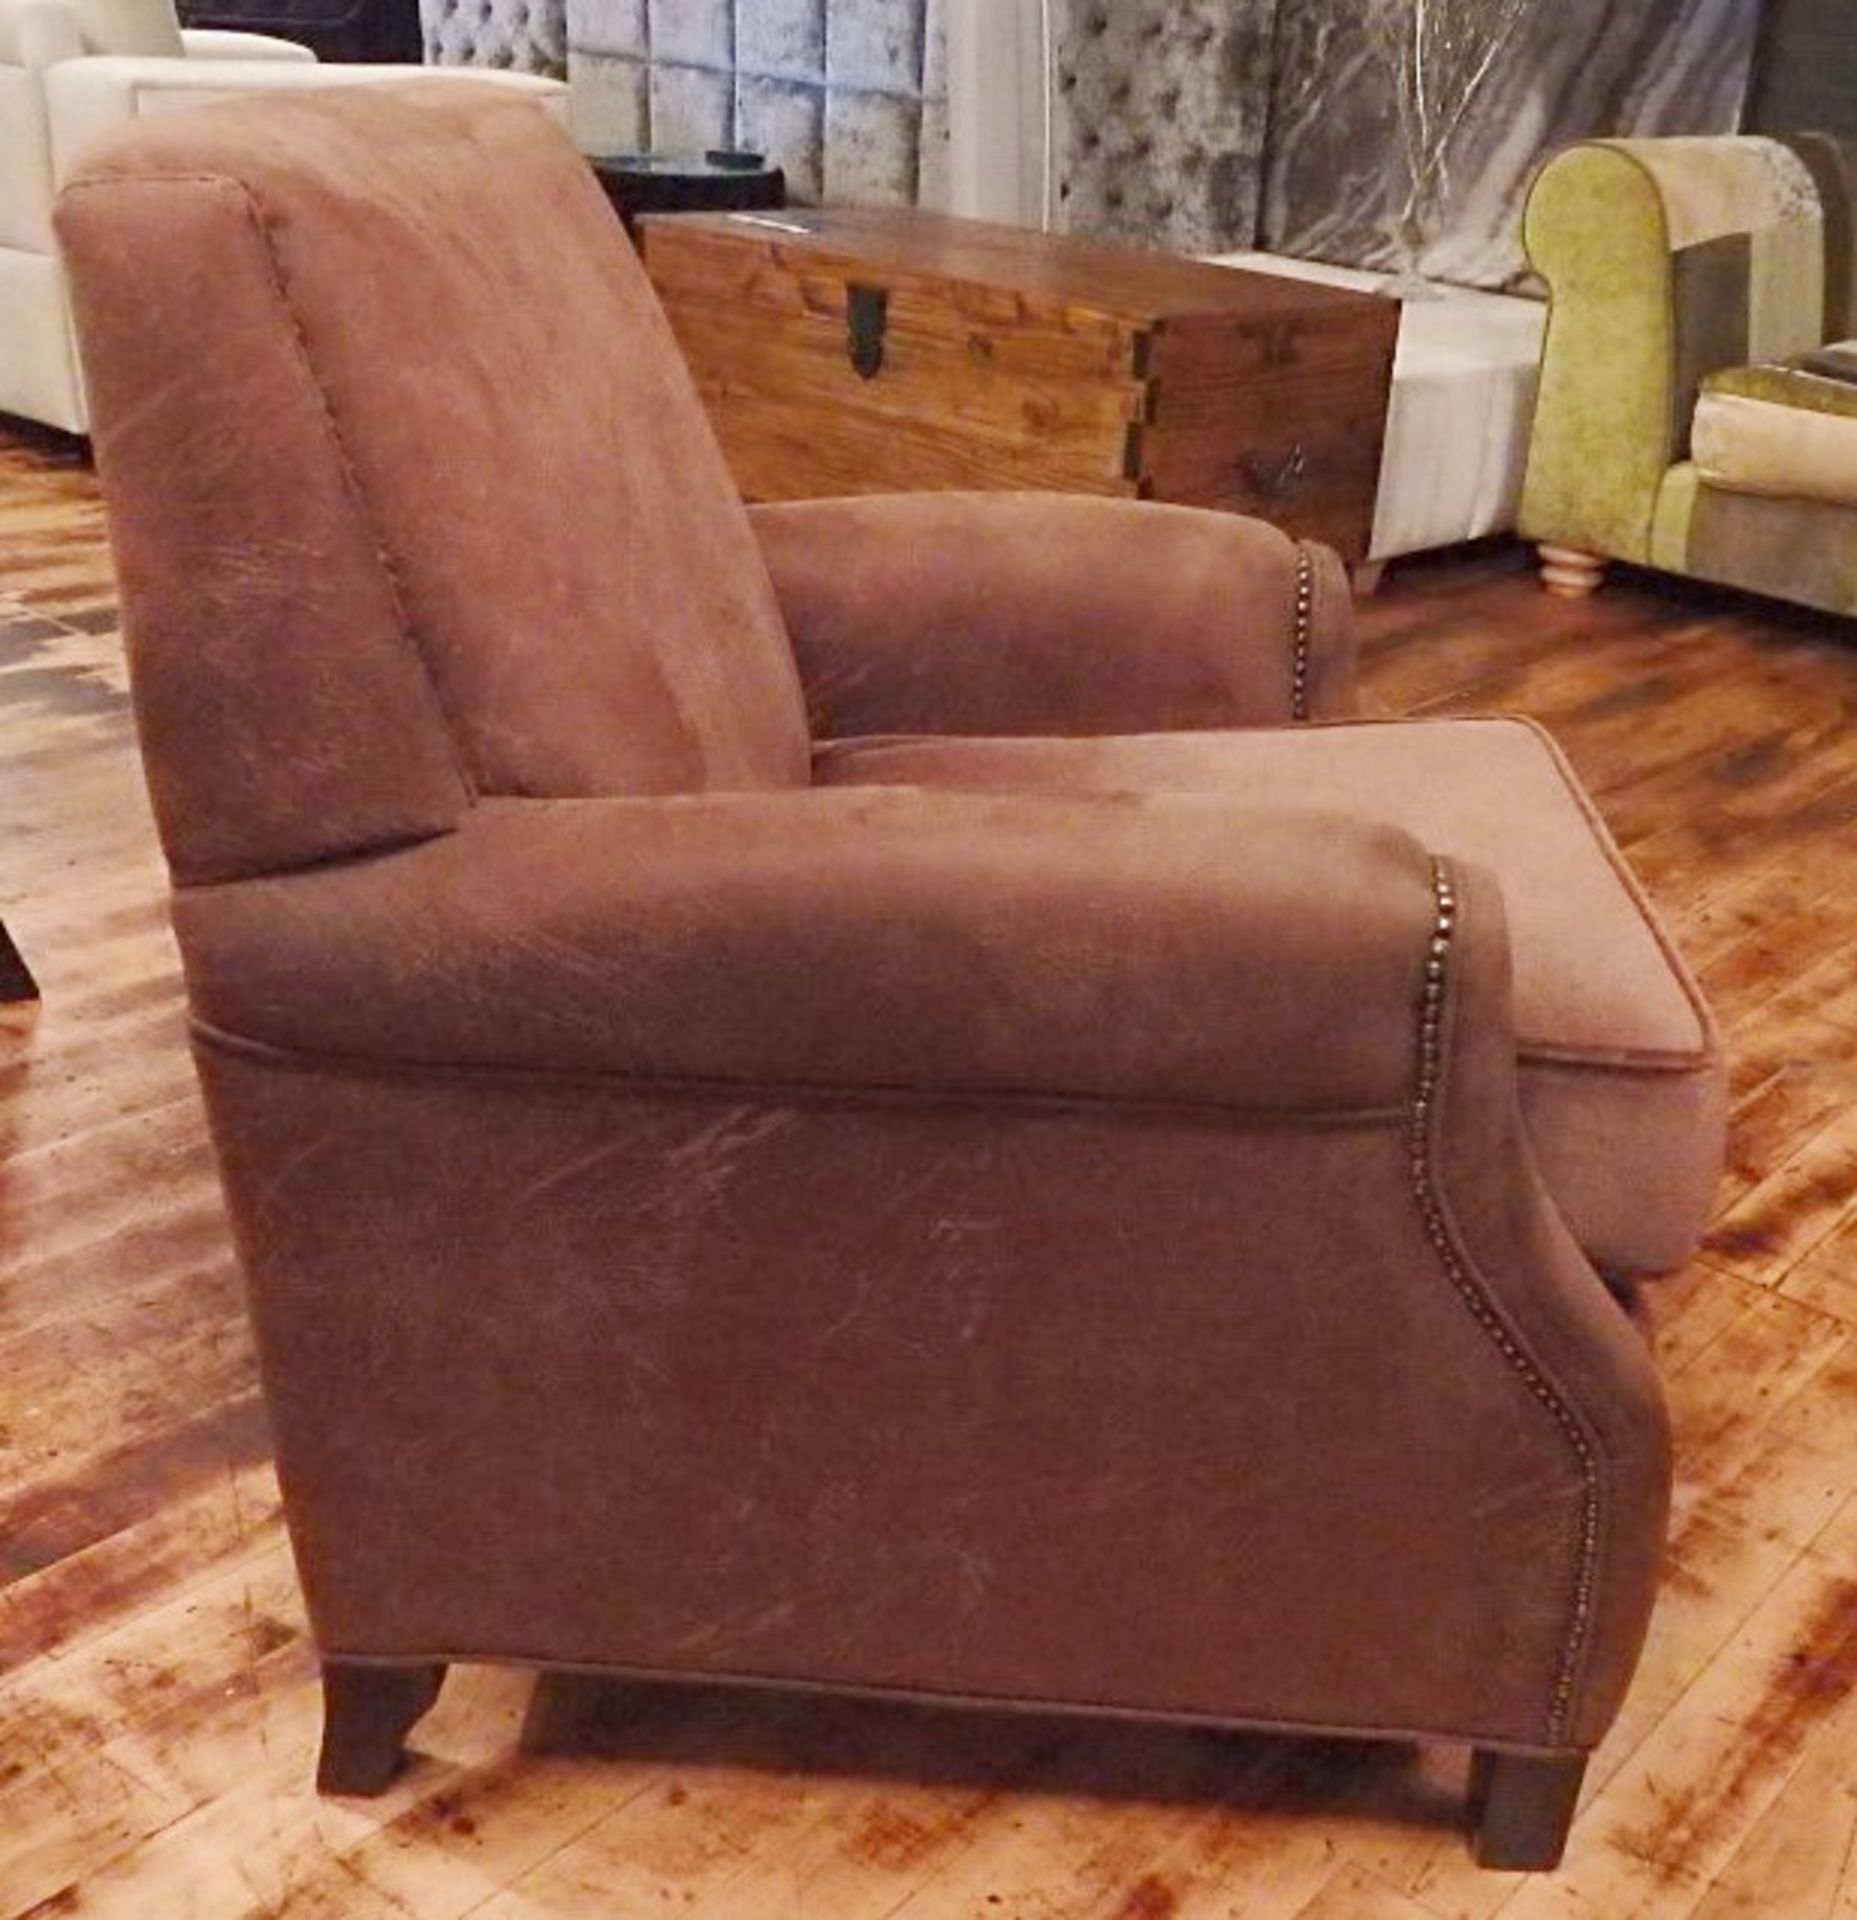 1 x Bespoke Brown Leather & Chenille Armchair - Expertly Built And Upholstered By British - Image 4 of 9